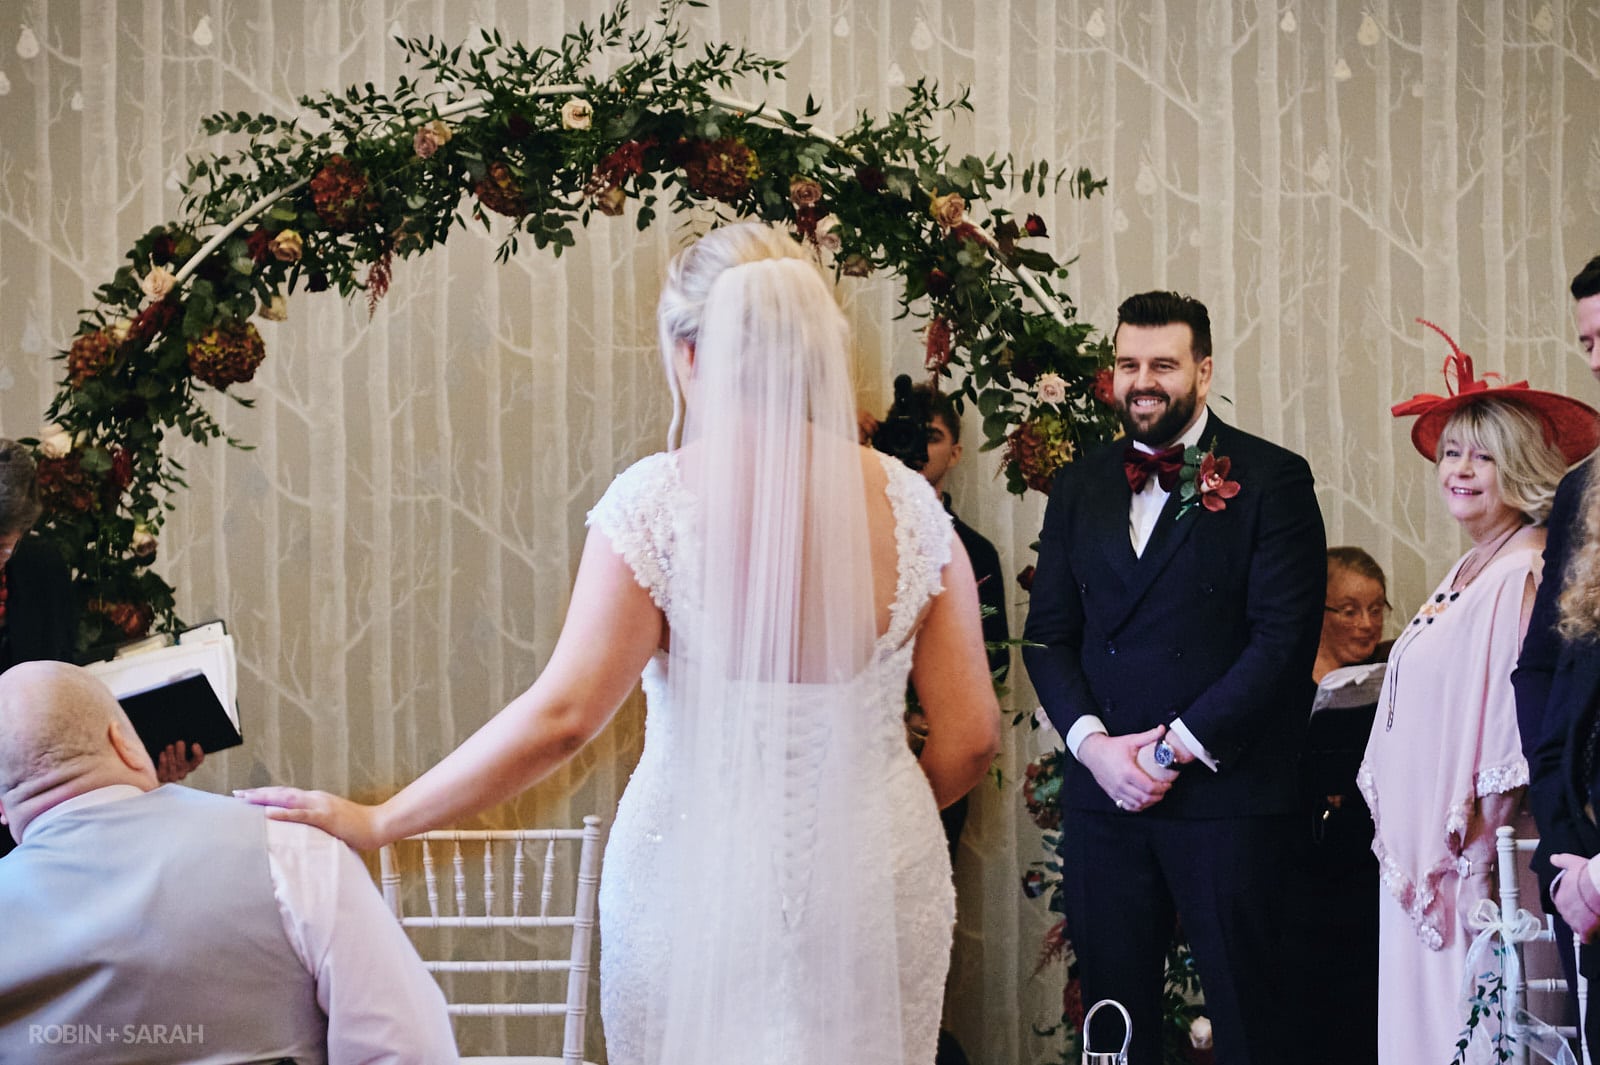 Bride and dad walk up aisle as groom and guests watch